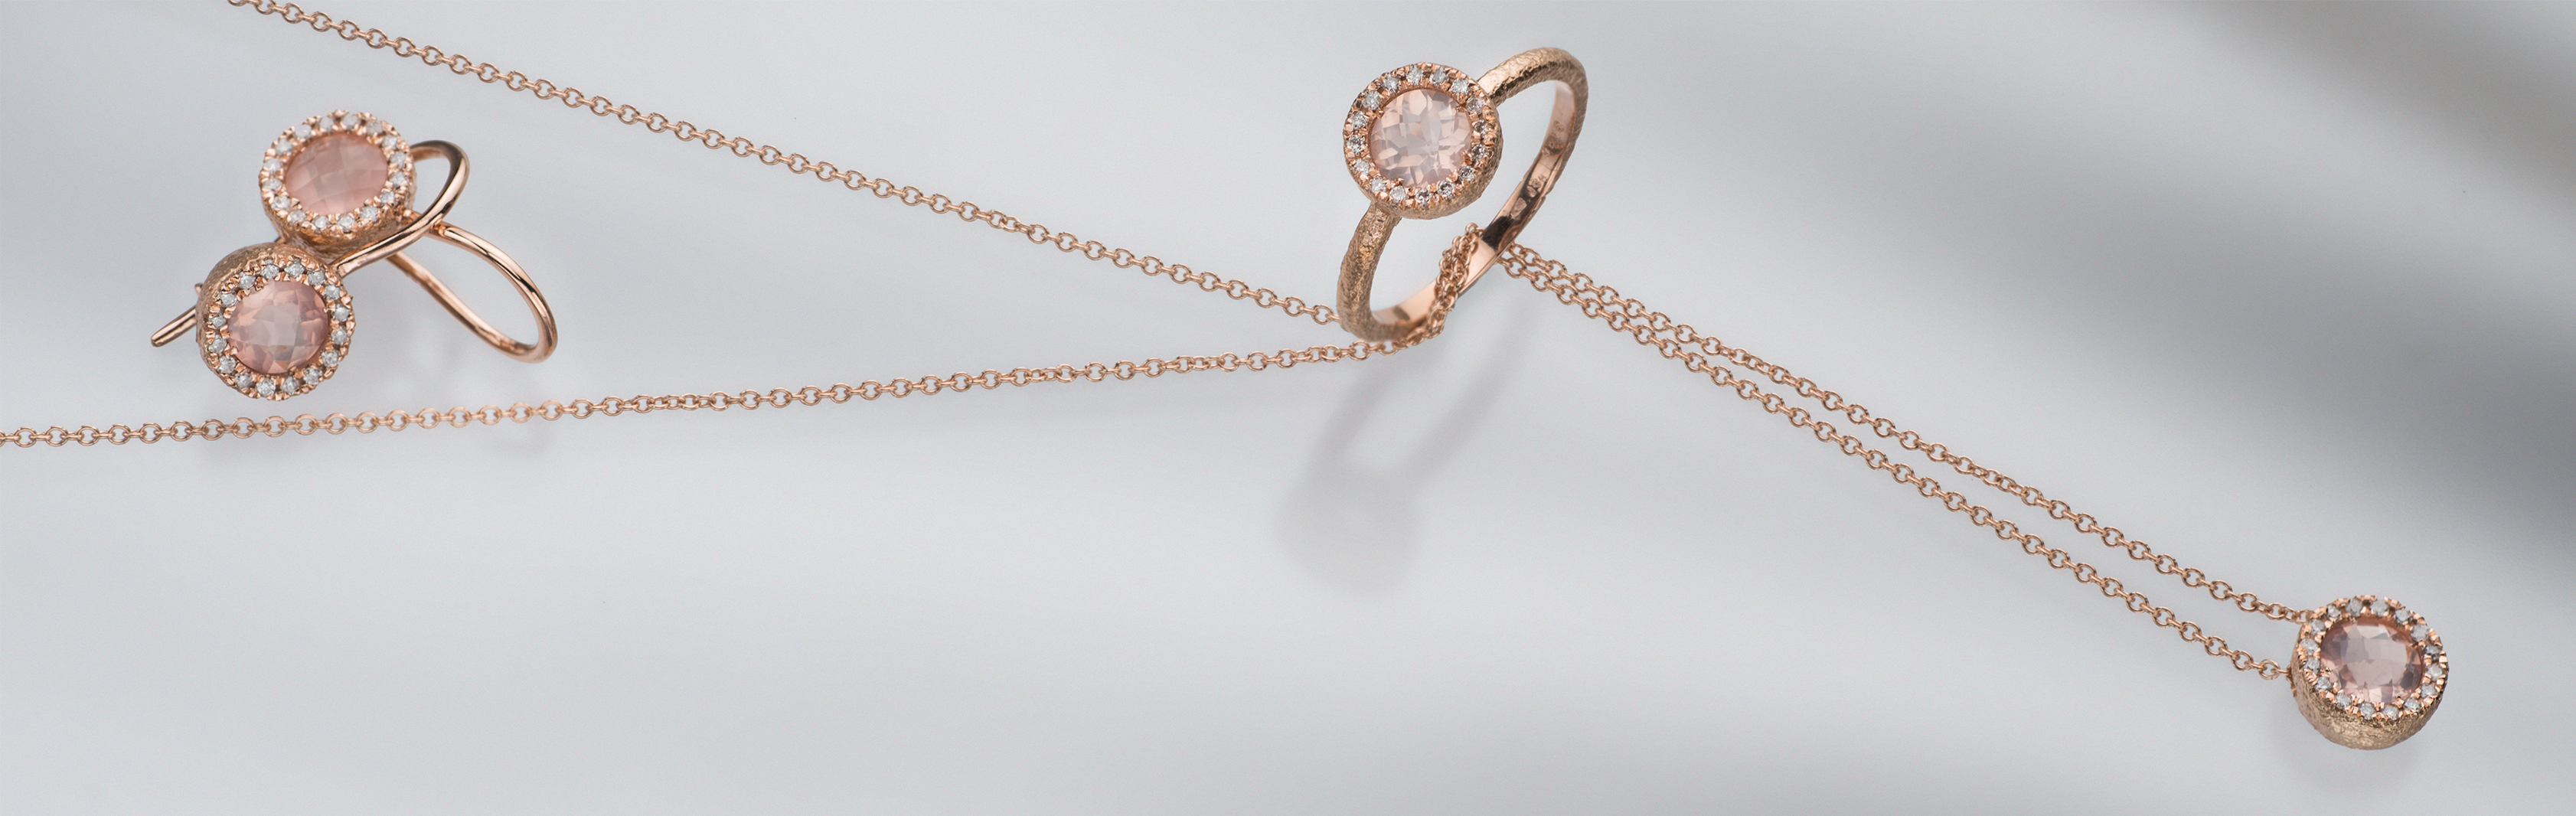 Rose Gold Collection | 14K Rose Gold and Rose Quartz Jewelry